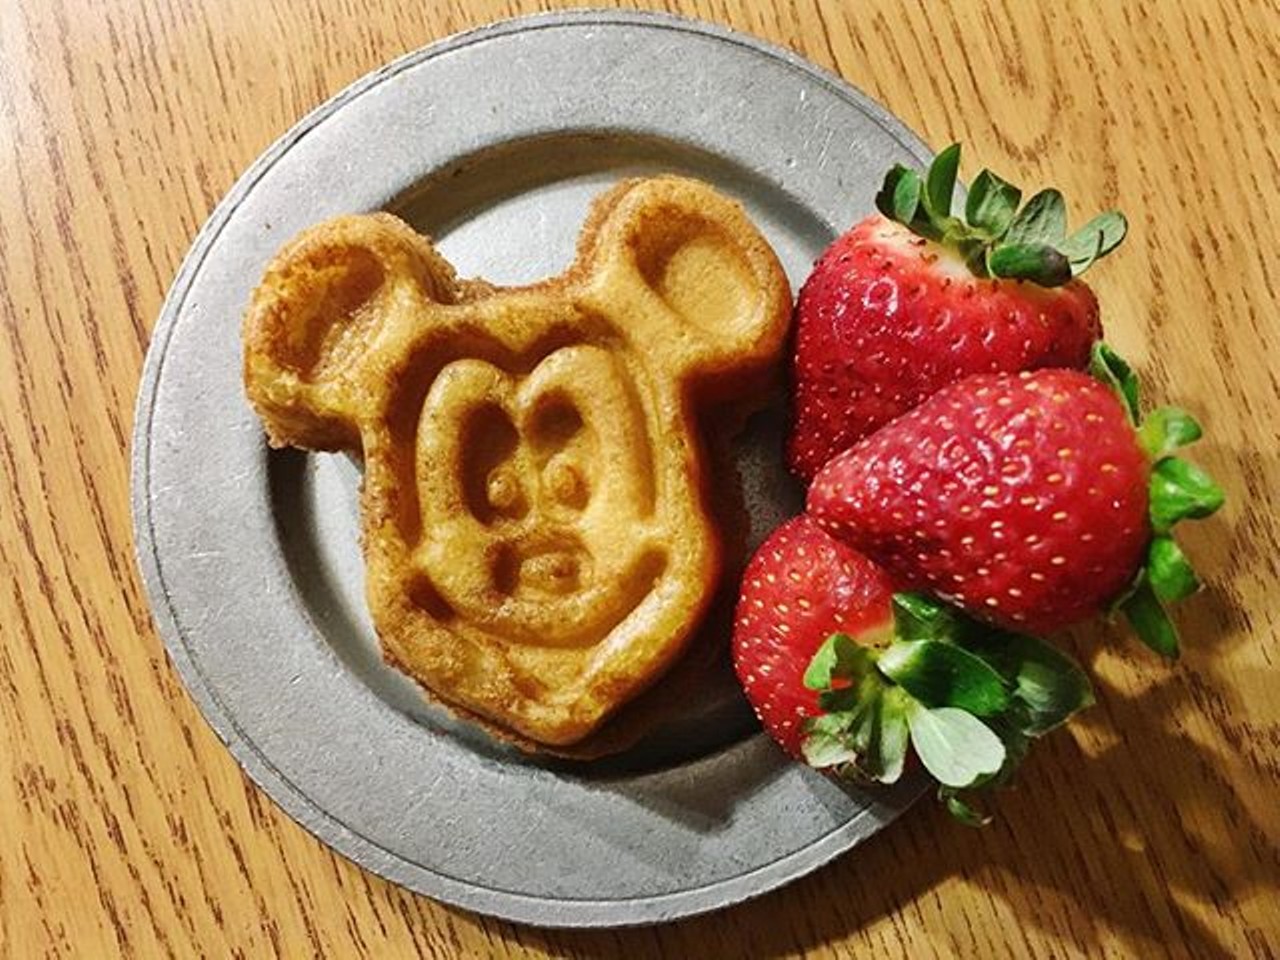 Mickey Mouse shaped waffle from Fort Wilderness.
Photo via @eat_it_b